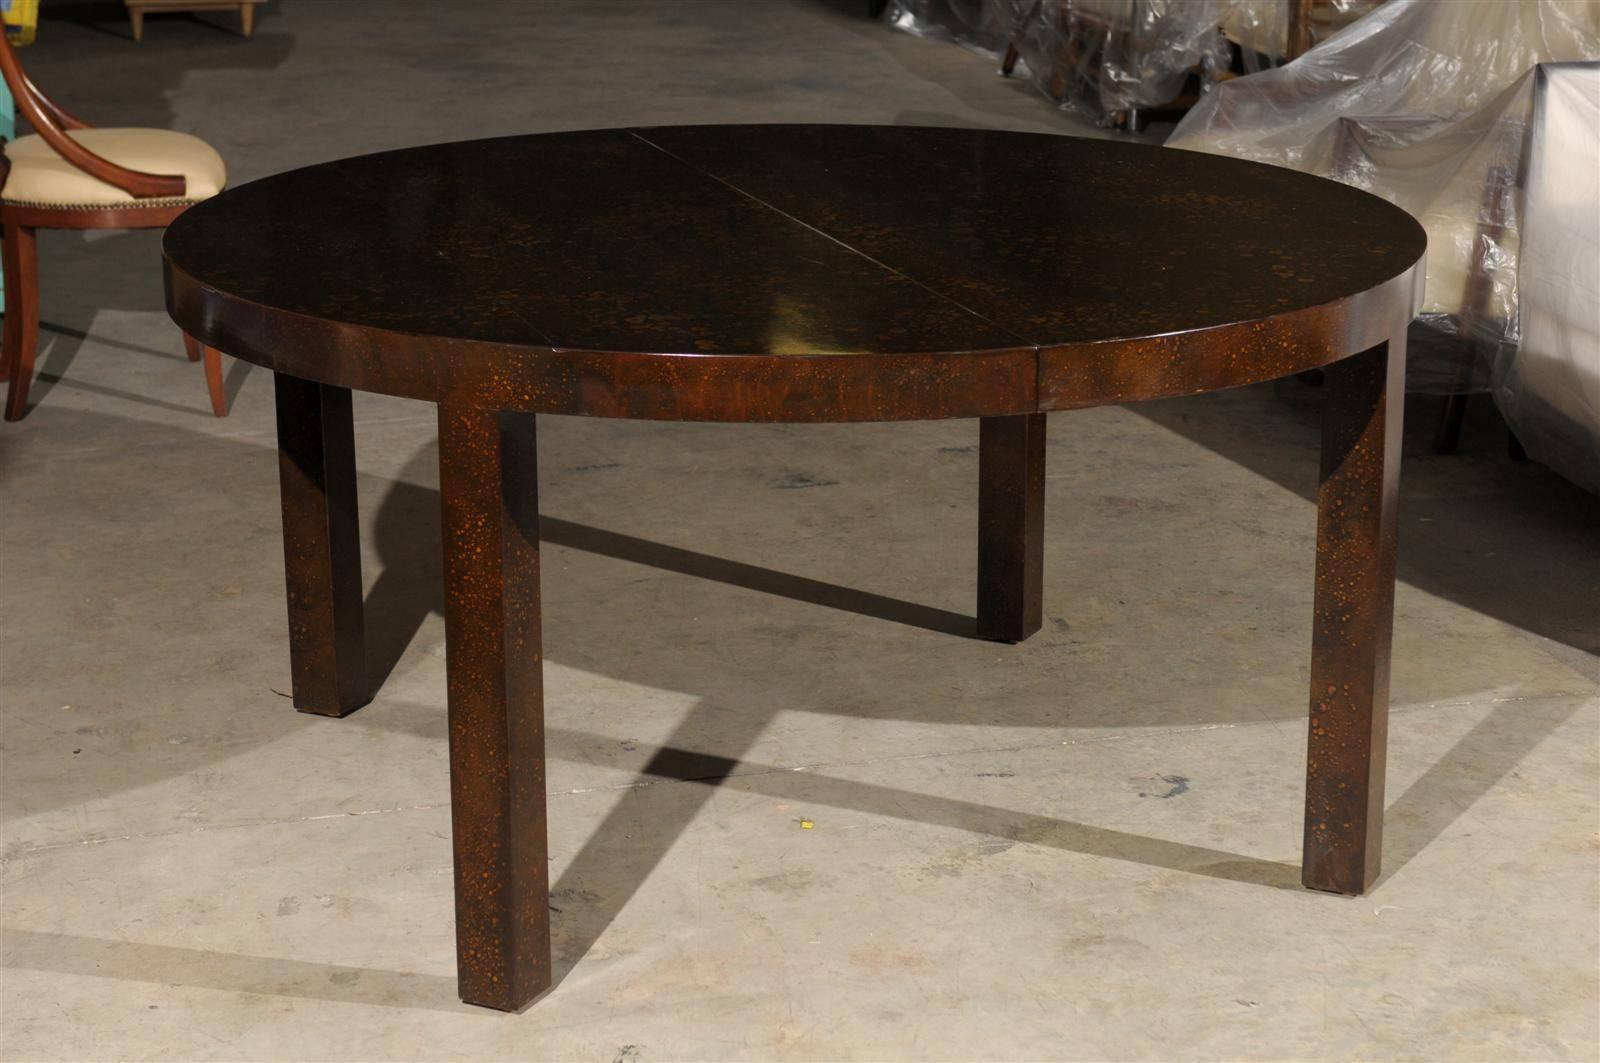 Vintage Round Parsons Style Faux Tortoiseshell Dining Table or Console 2